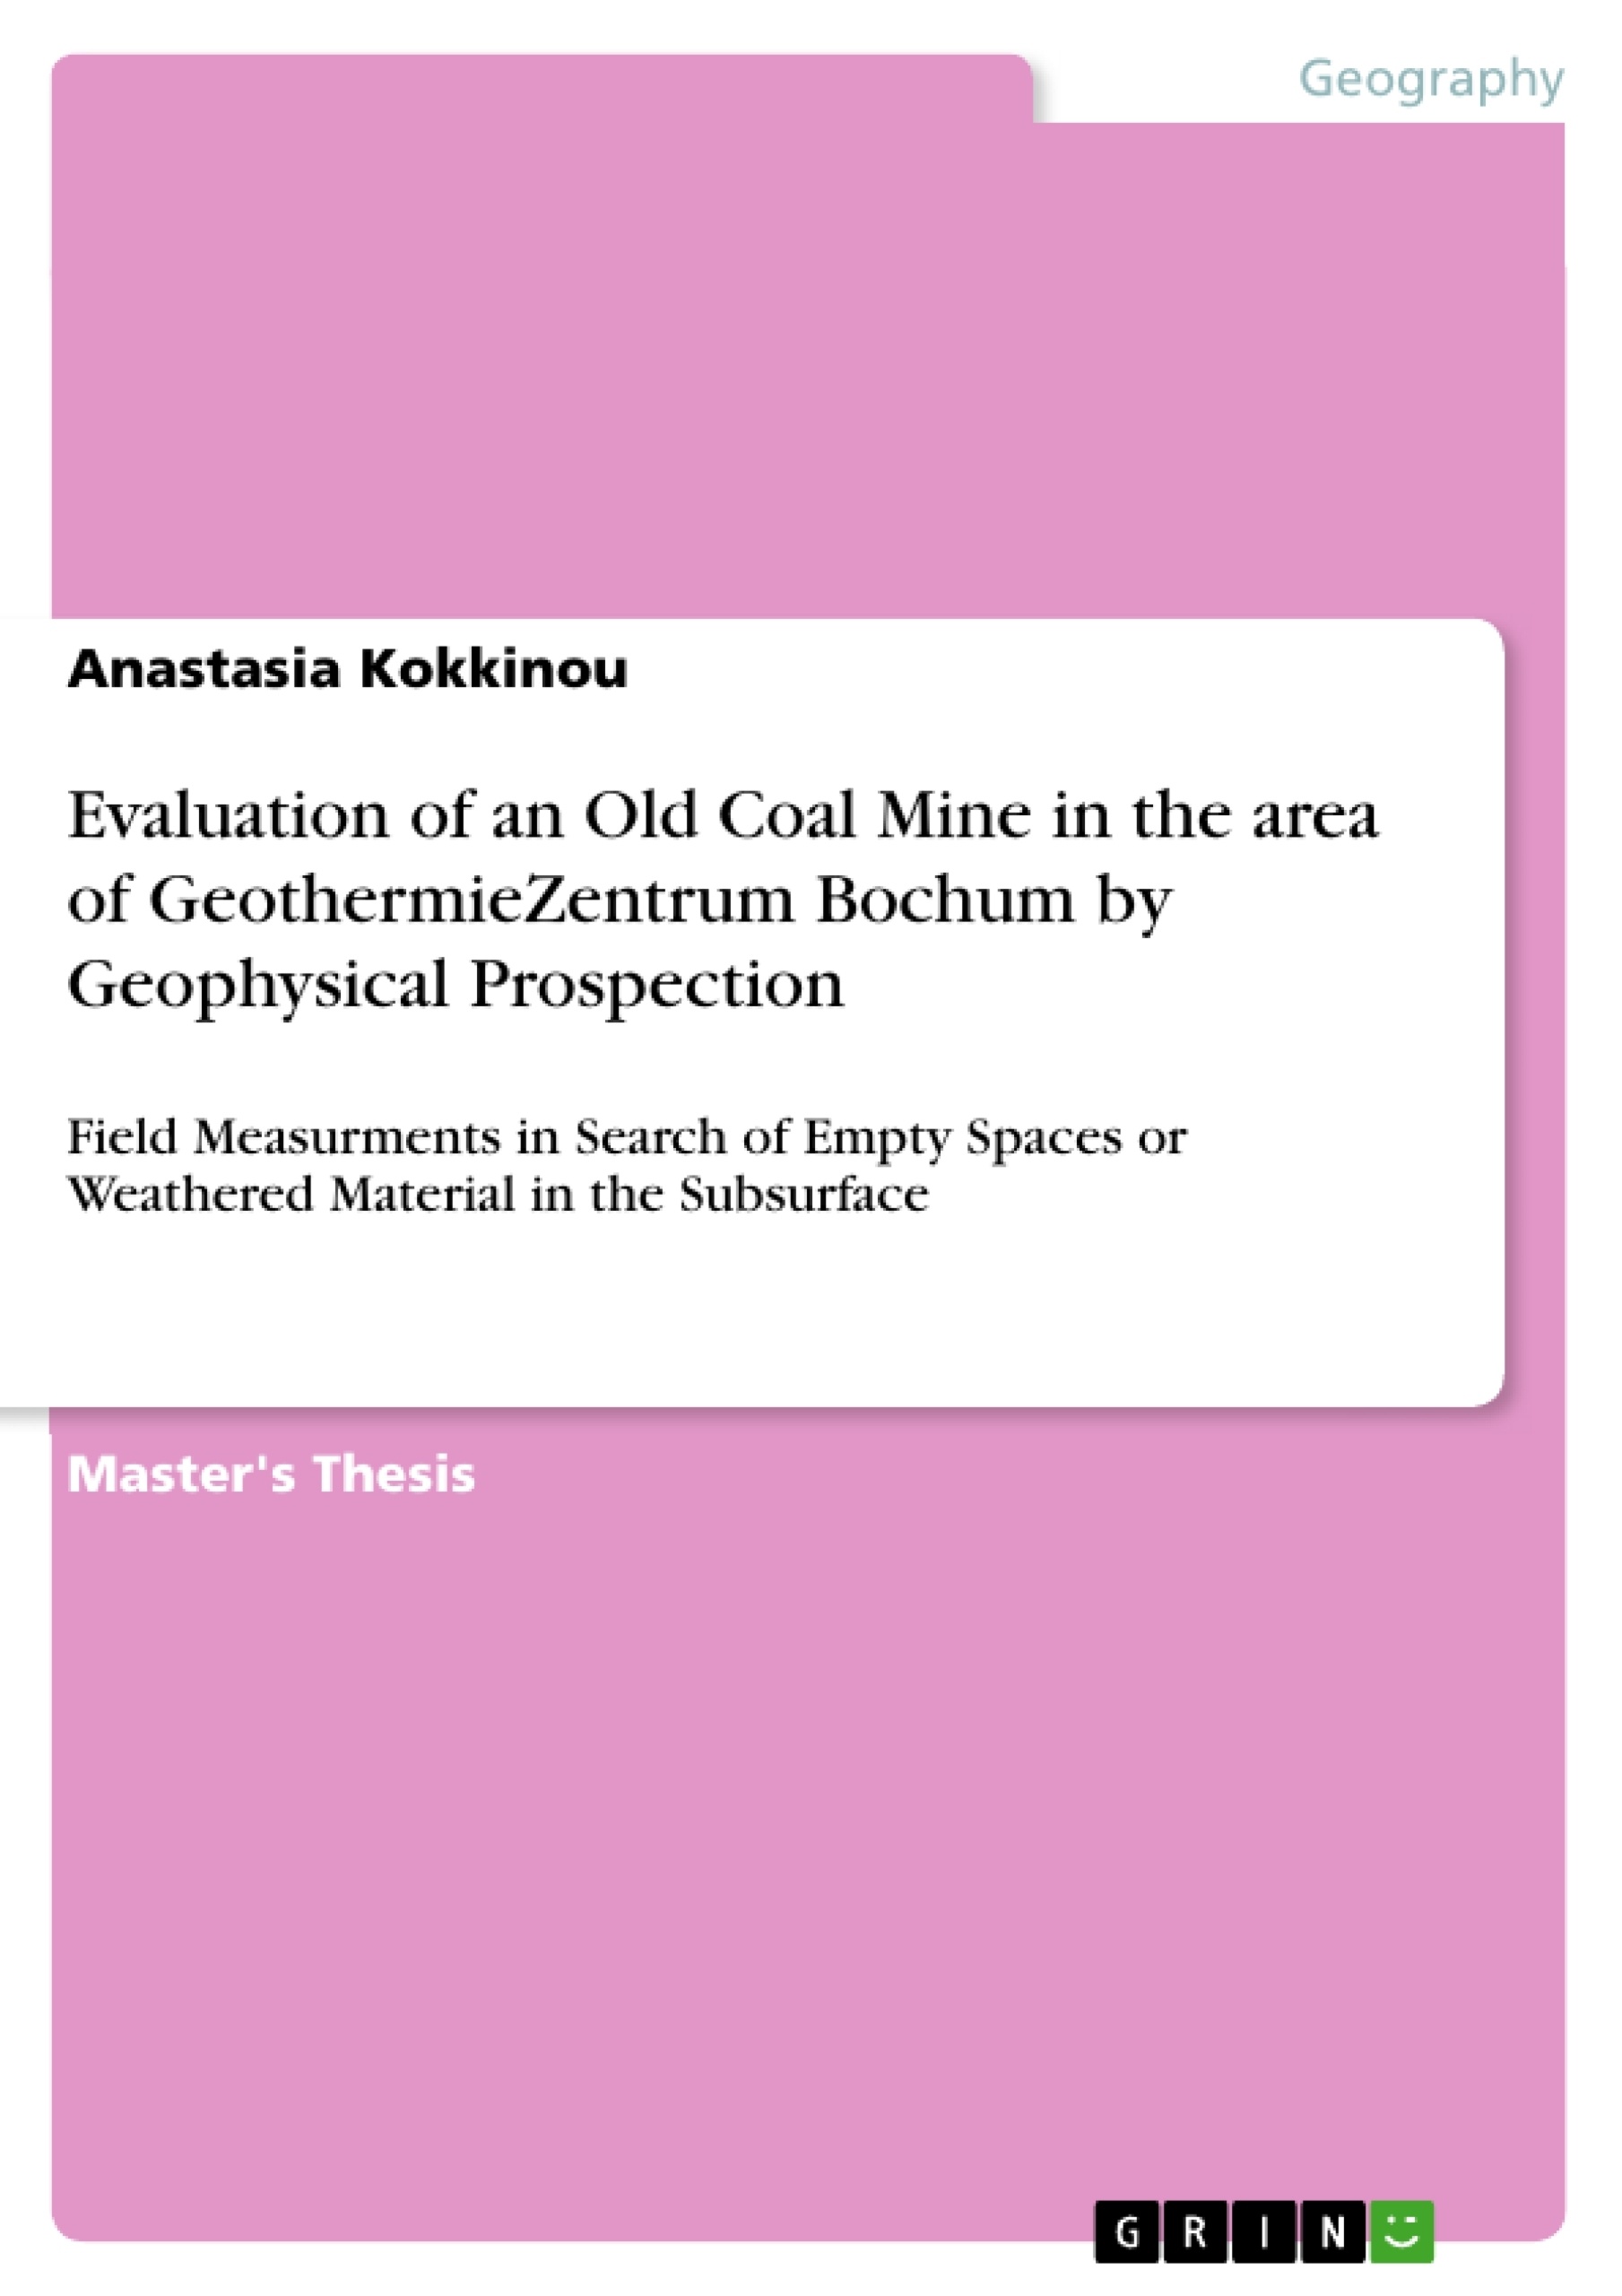 Título: Evaluation of an Old Coal Mine in the area of GeothermieZentrum Bochum by Geophysical Prospection